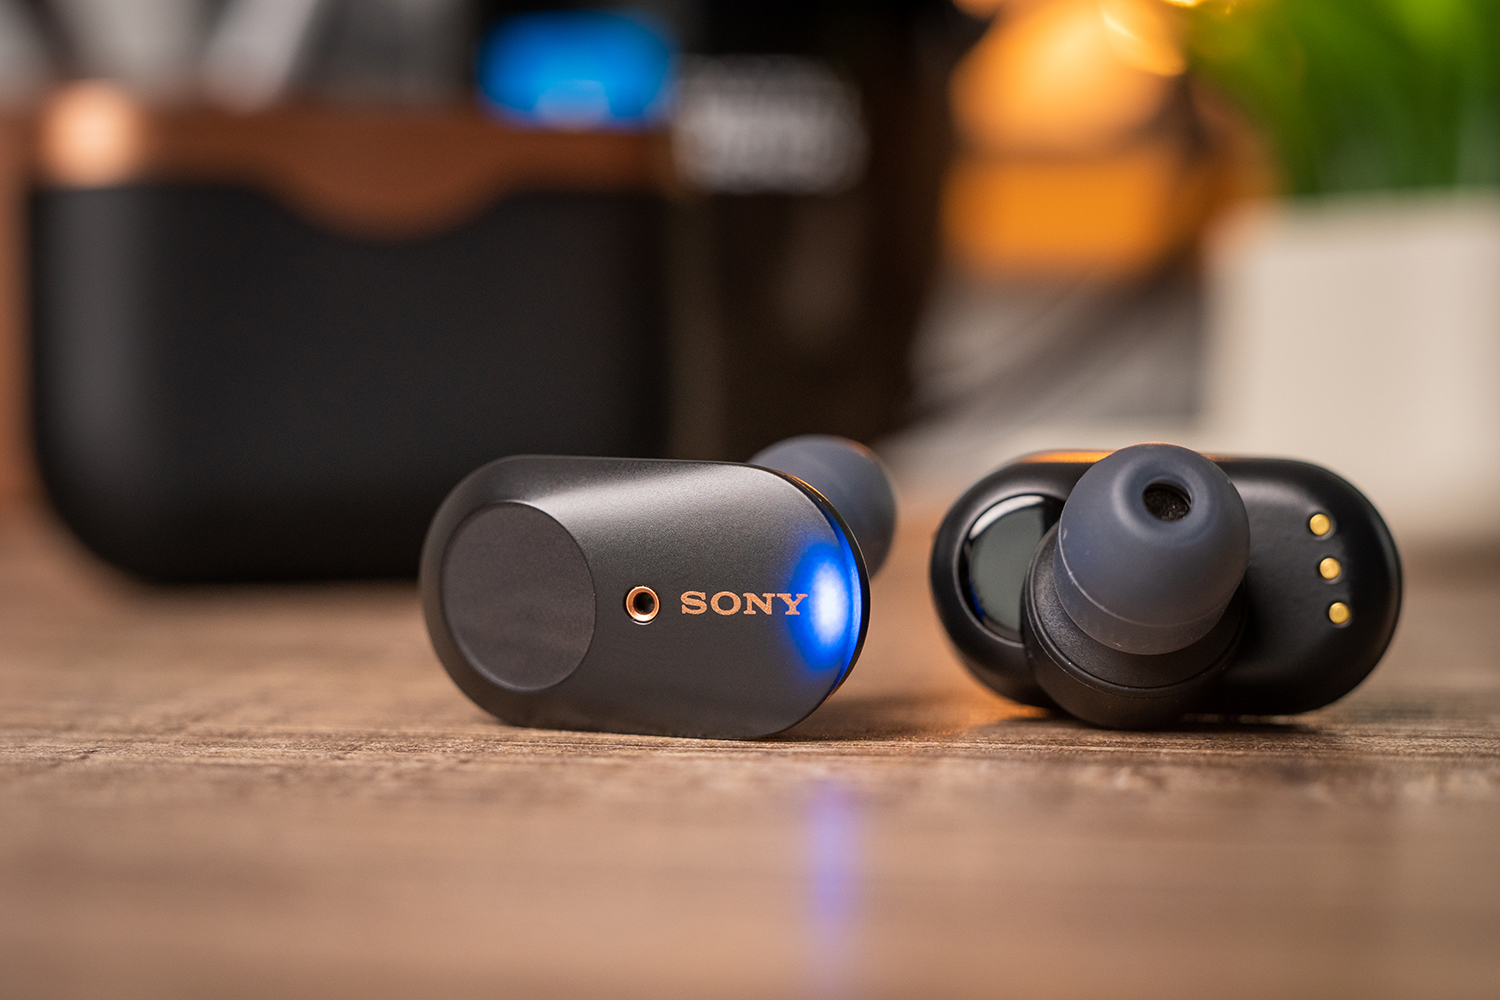 Sony debuts WF-C700N, its most affordable noise-canceling earbuds